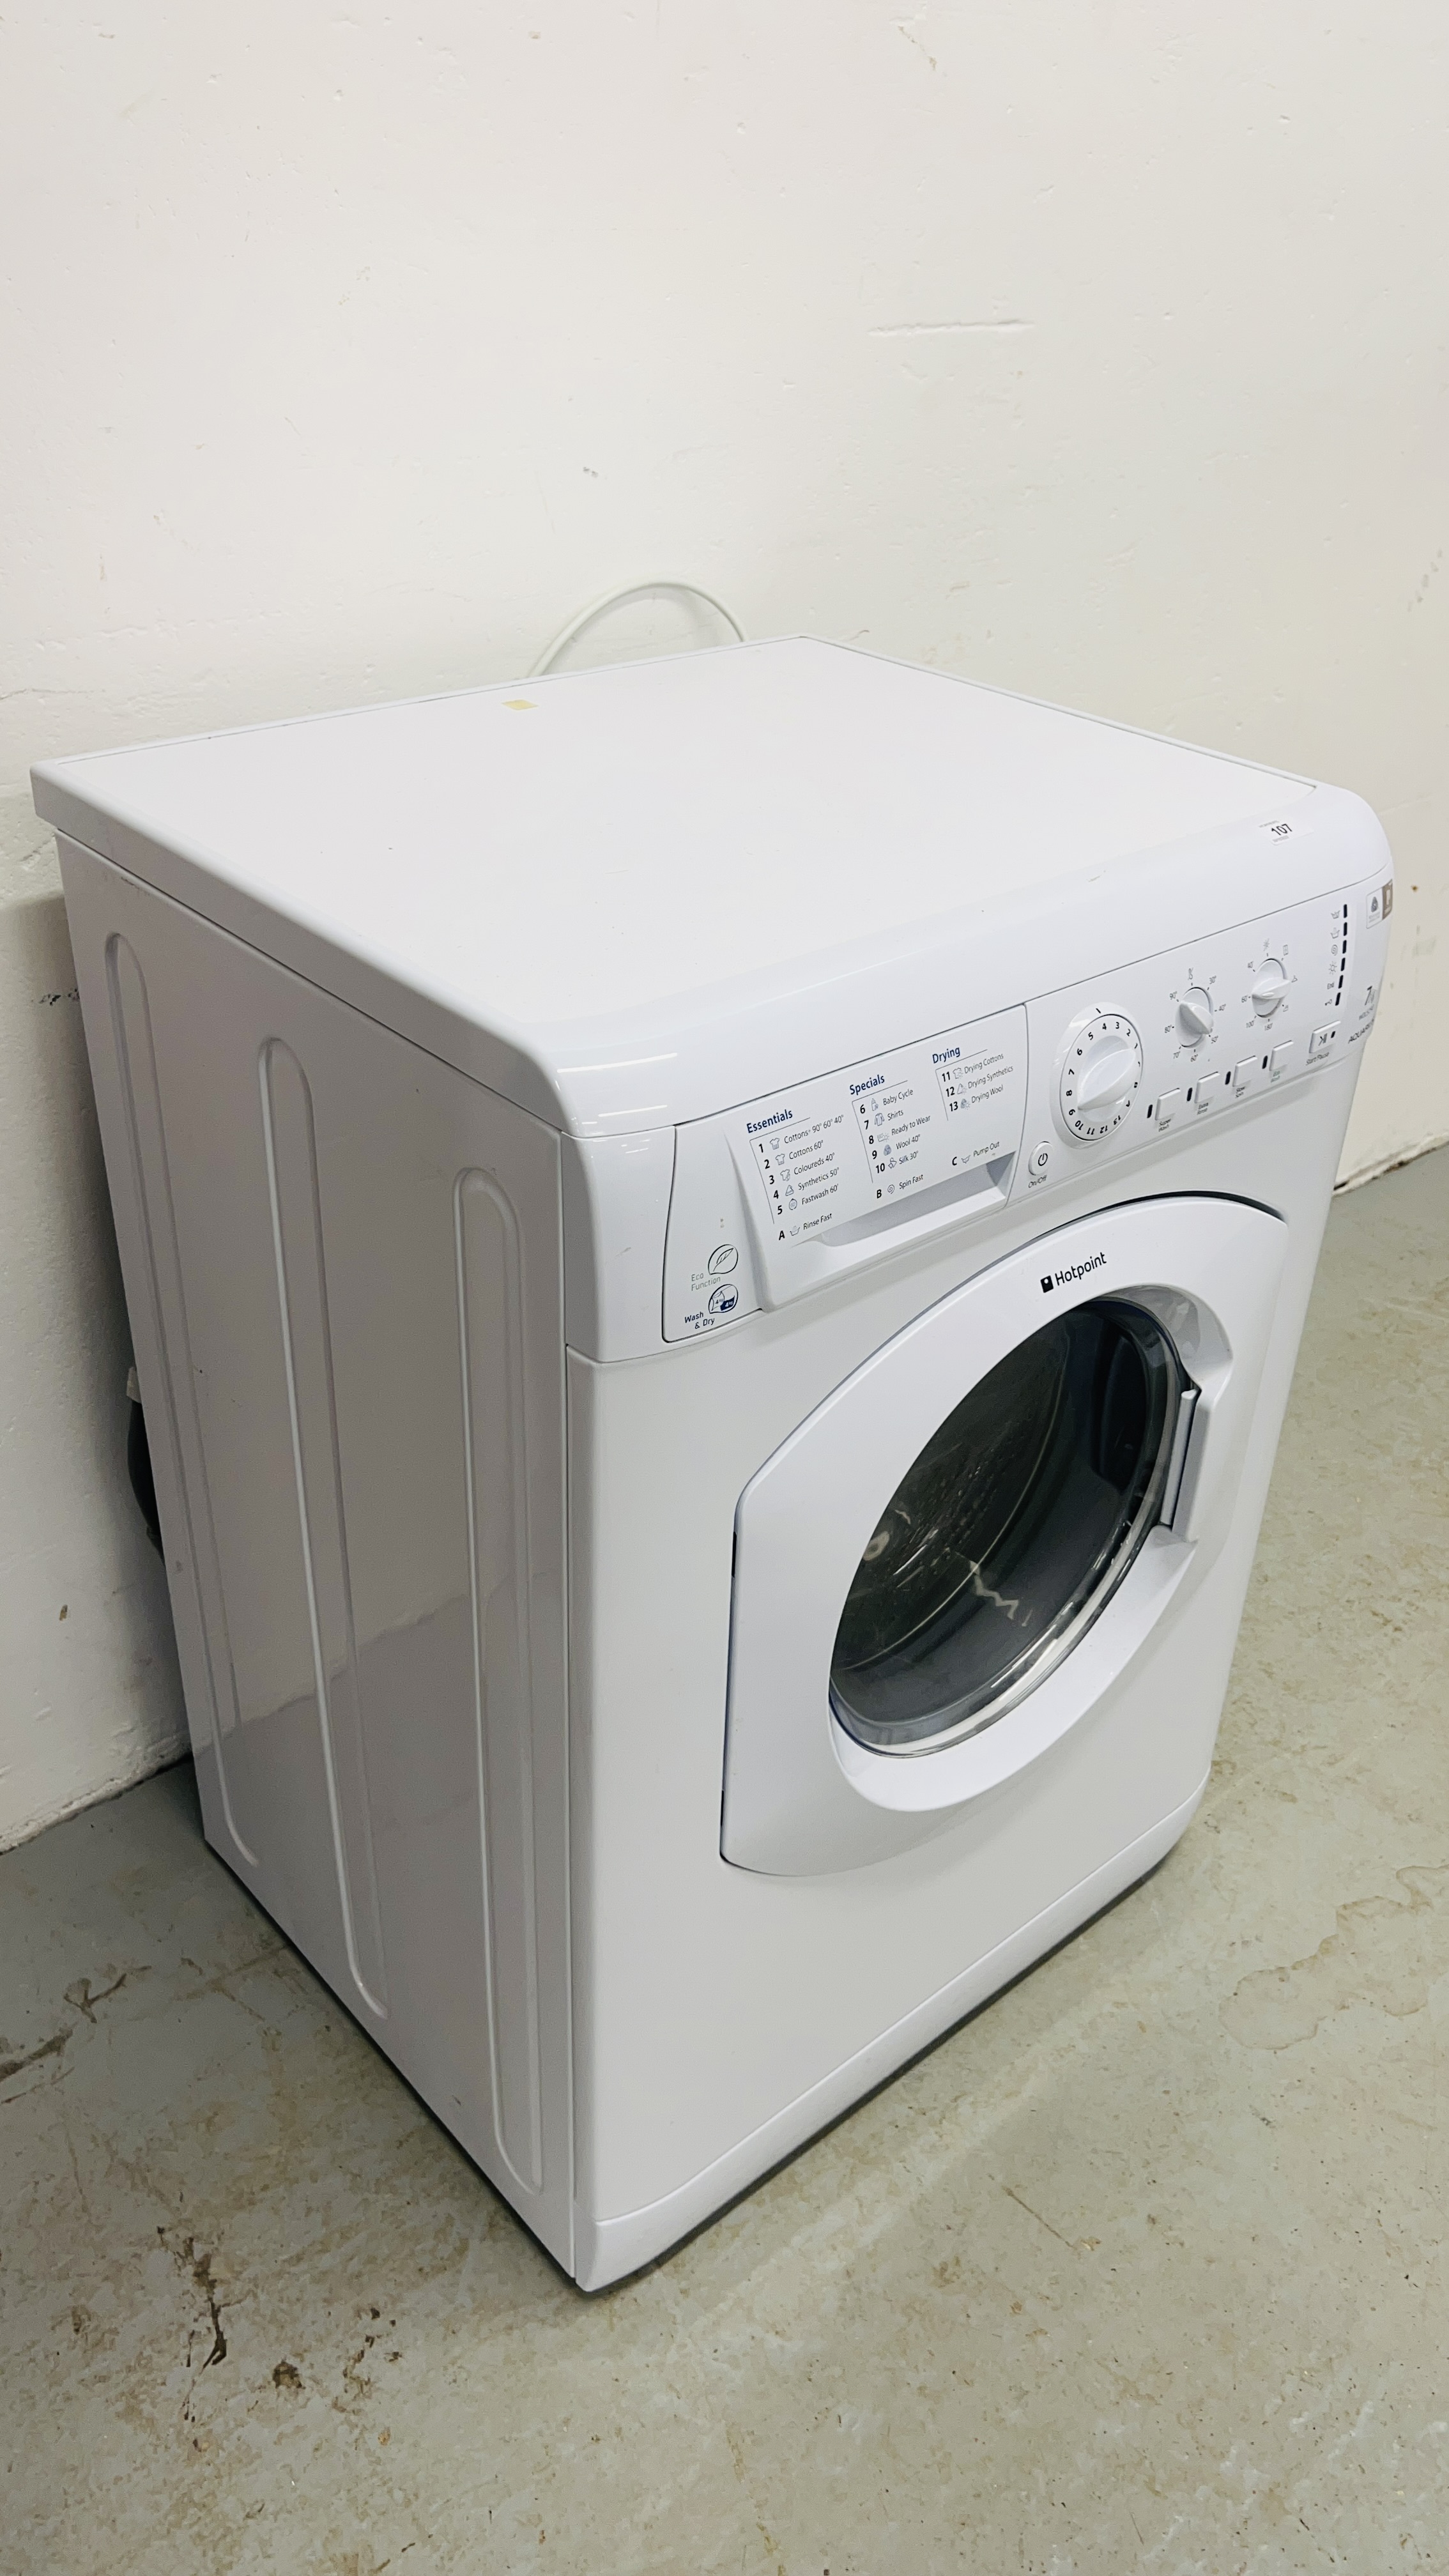 A HOTPOINT AQUARIUS 7KG WASHING MACHINE - SOLD AS SEEN. - Image 6 of 6